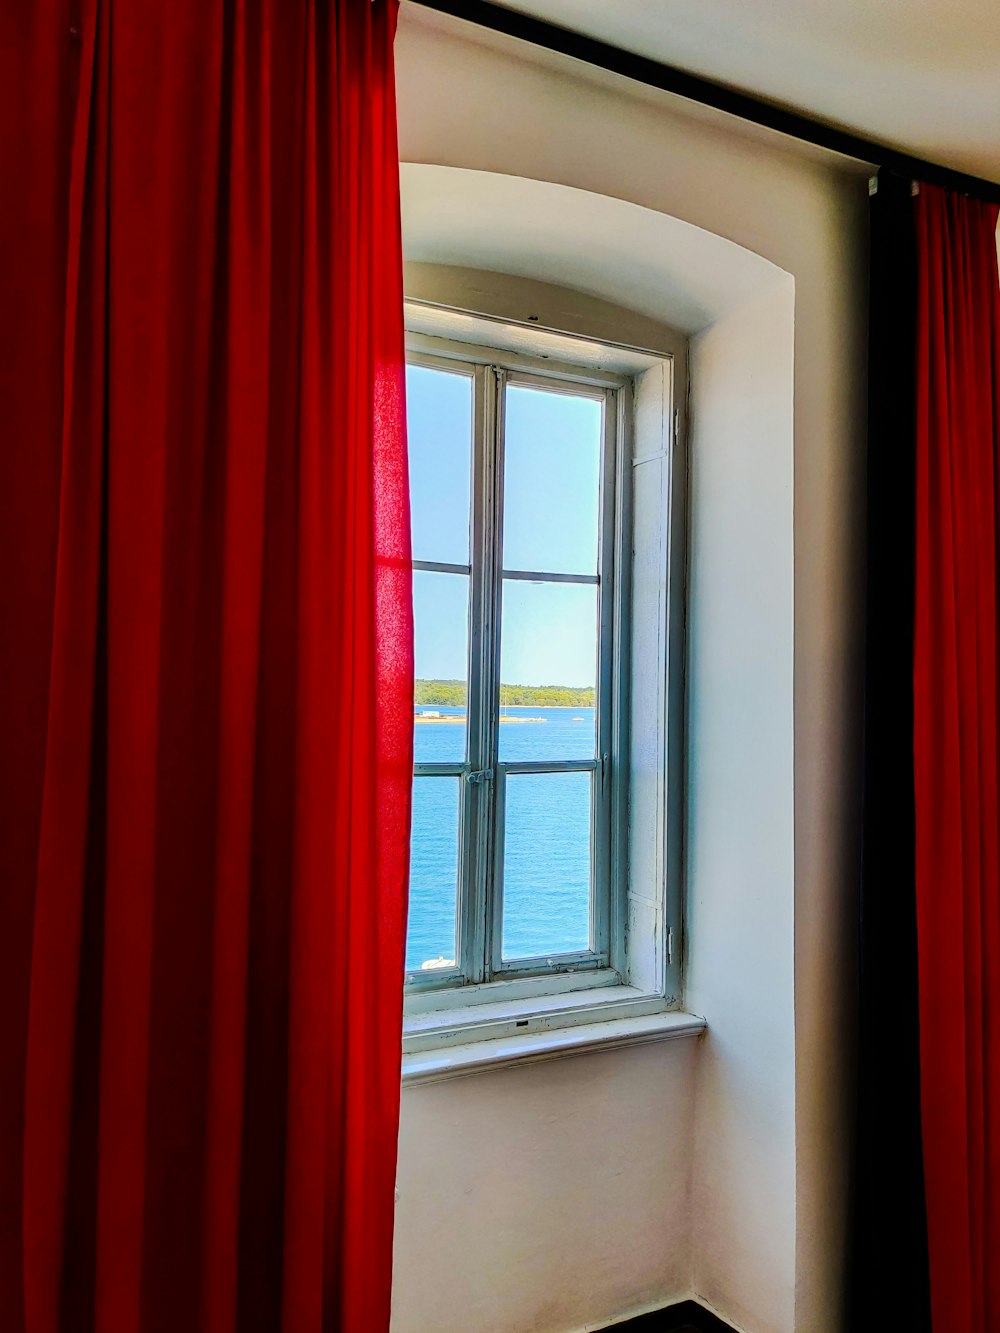 a window with a red curtain and a view of the ocean